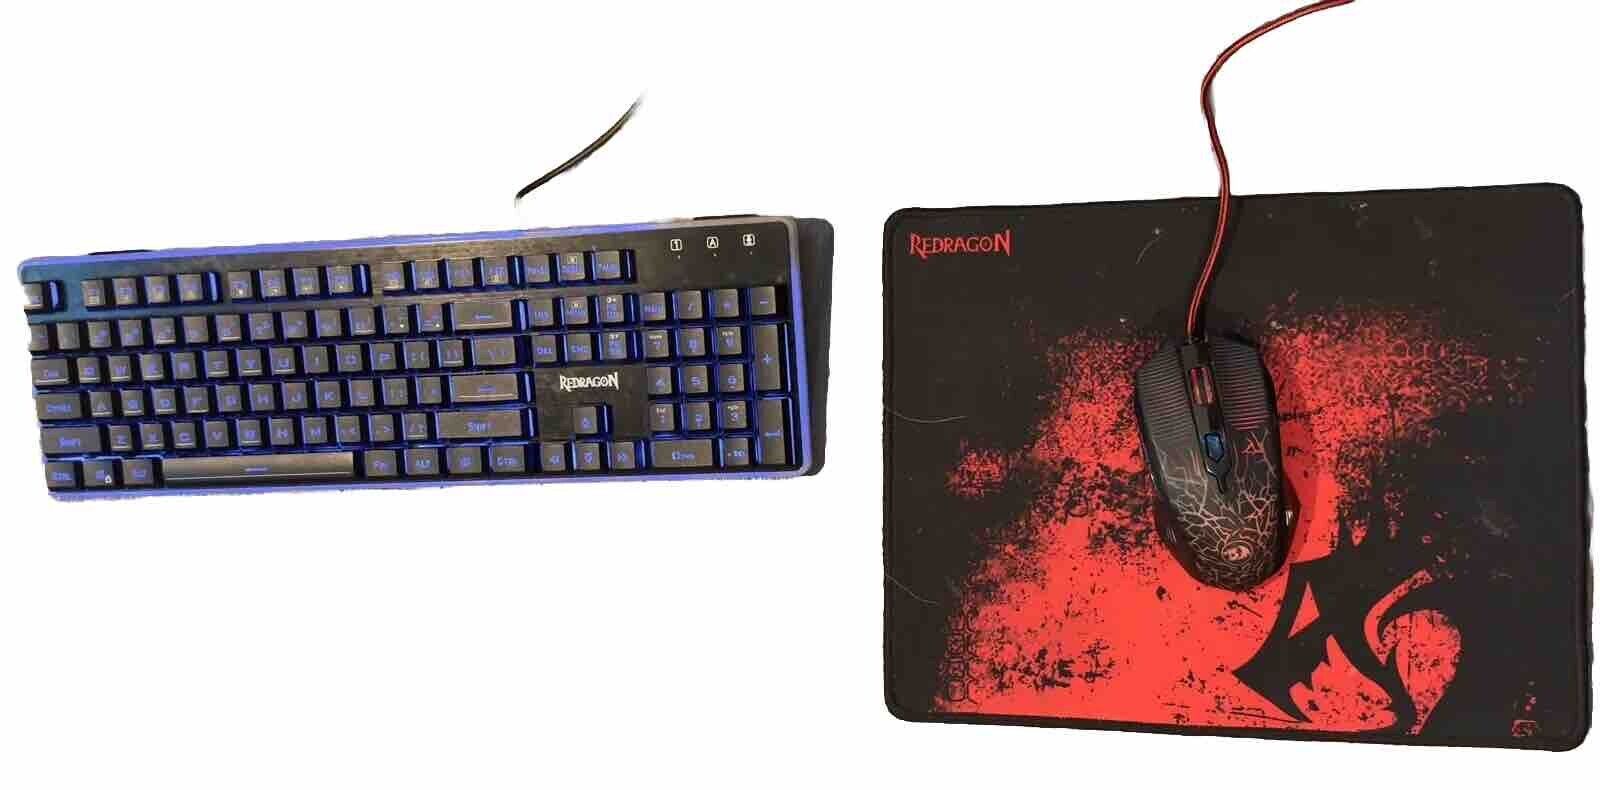 Redragon S107 Keyboard, M602 Mouse and mousepad TESTED AND WORKS